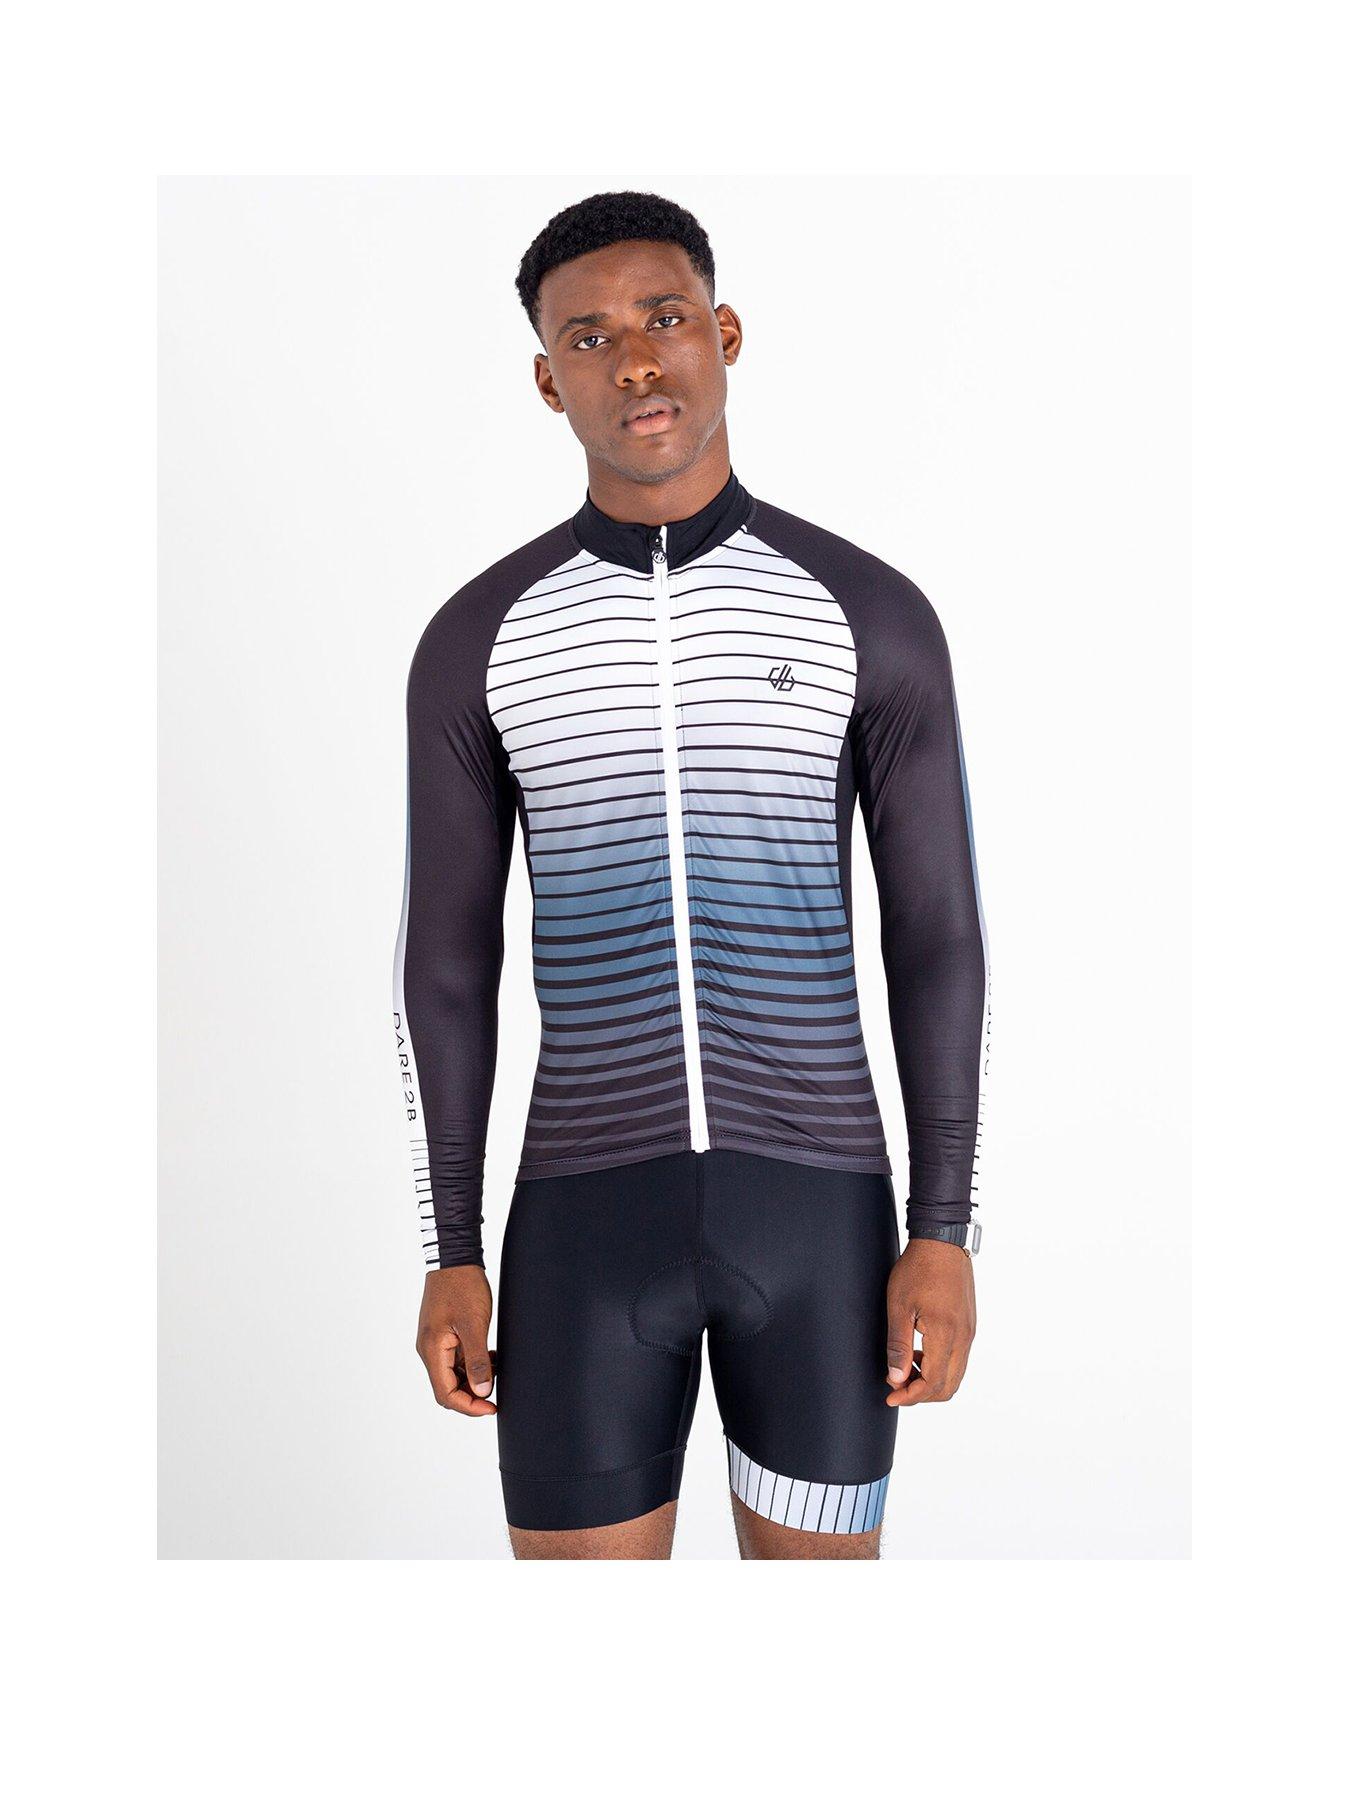  AEP VIRTUOUS LONG SLEEVE BLUE/RED MENS CYCLING JERSEY